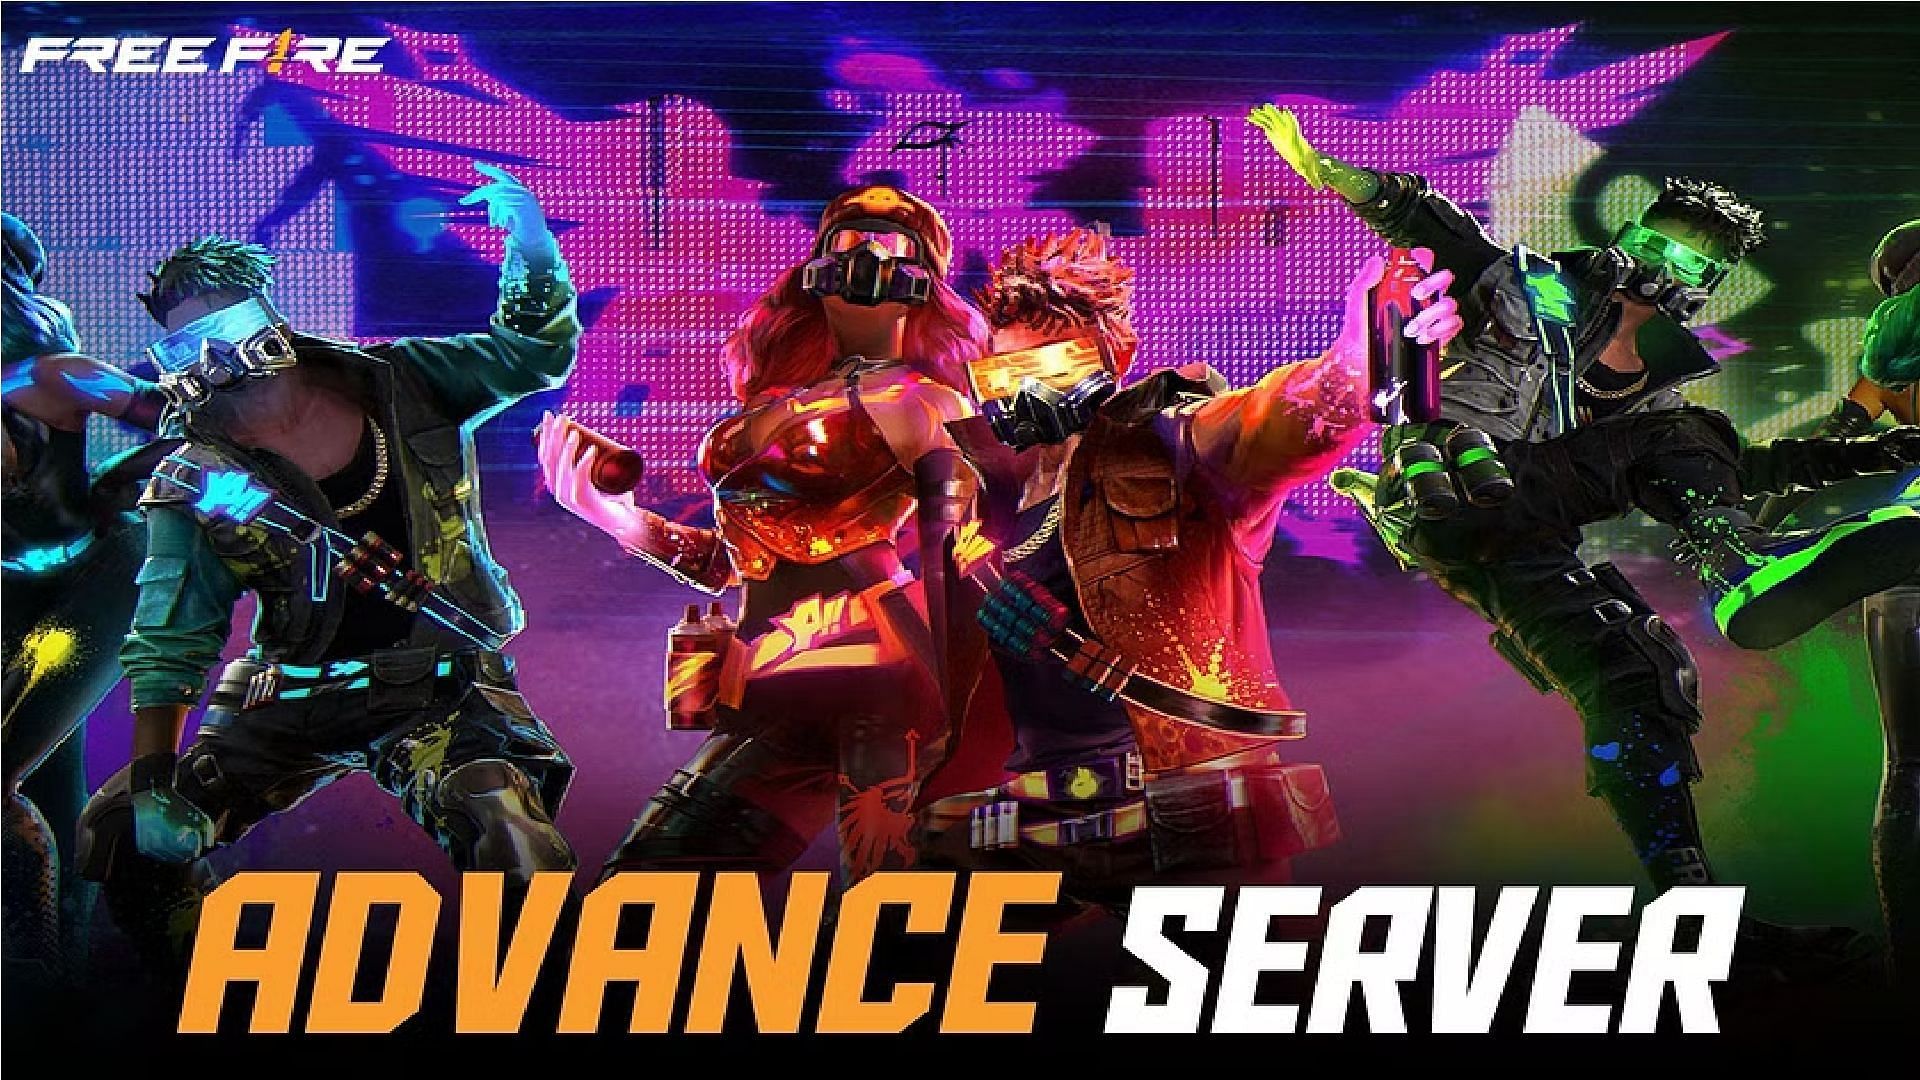 How to download Free Fire OB24 Advance Server